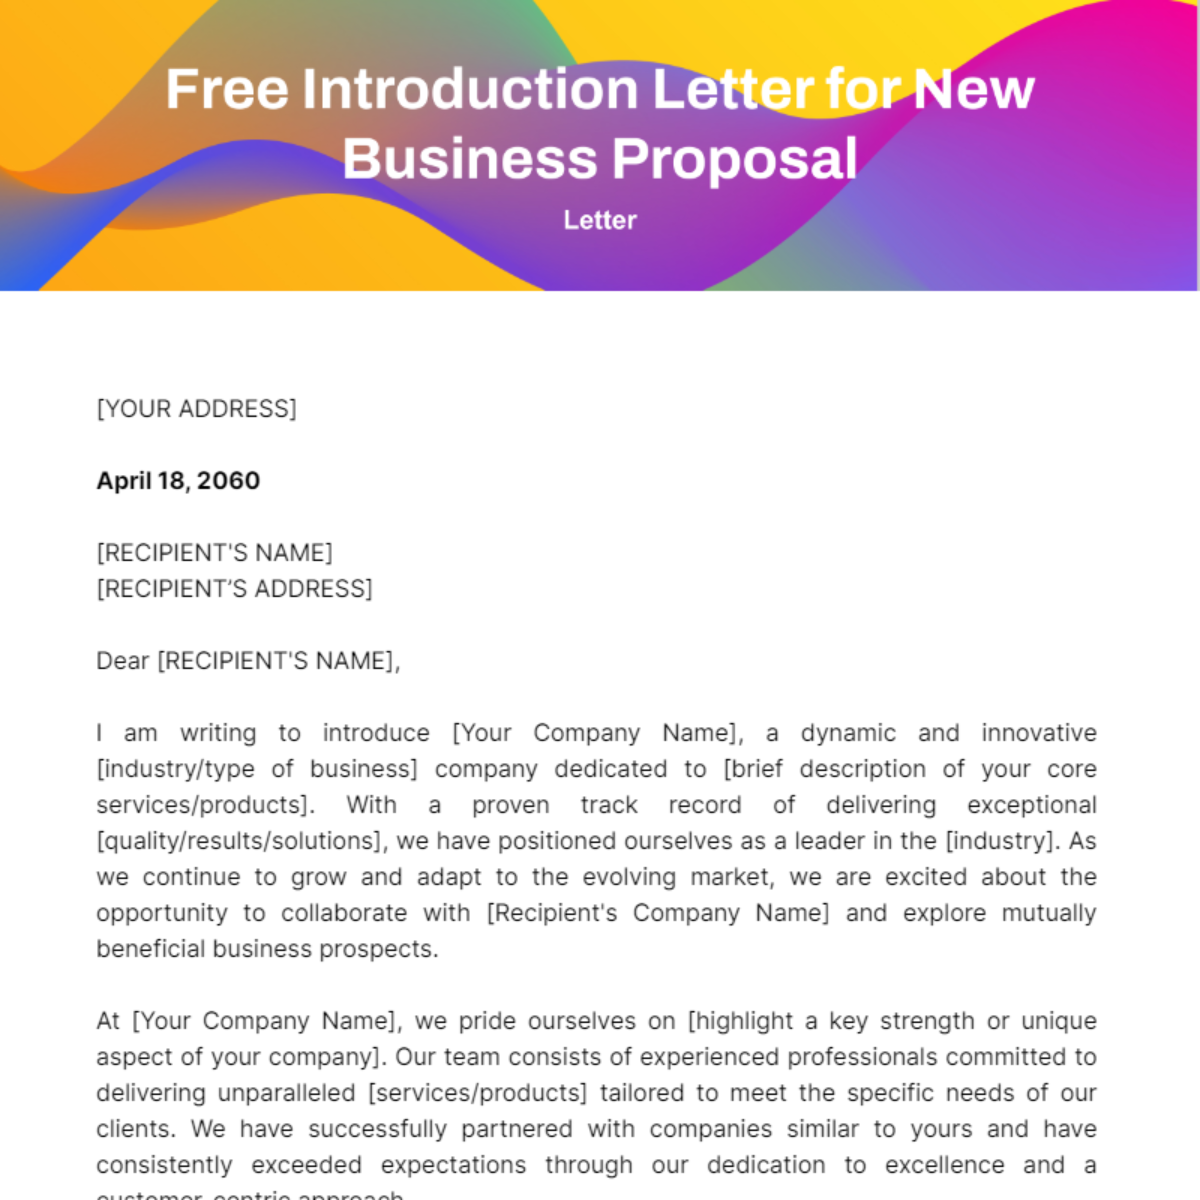 Introduction Letter for New Business Proposal Template